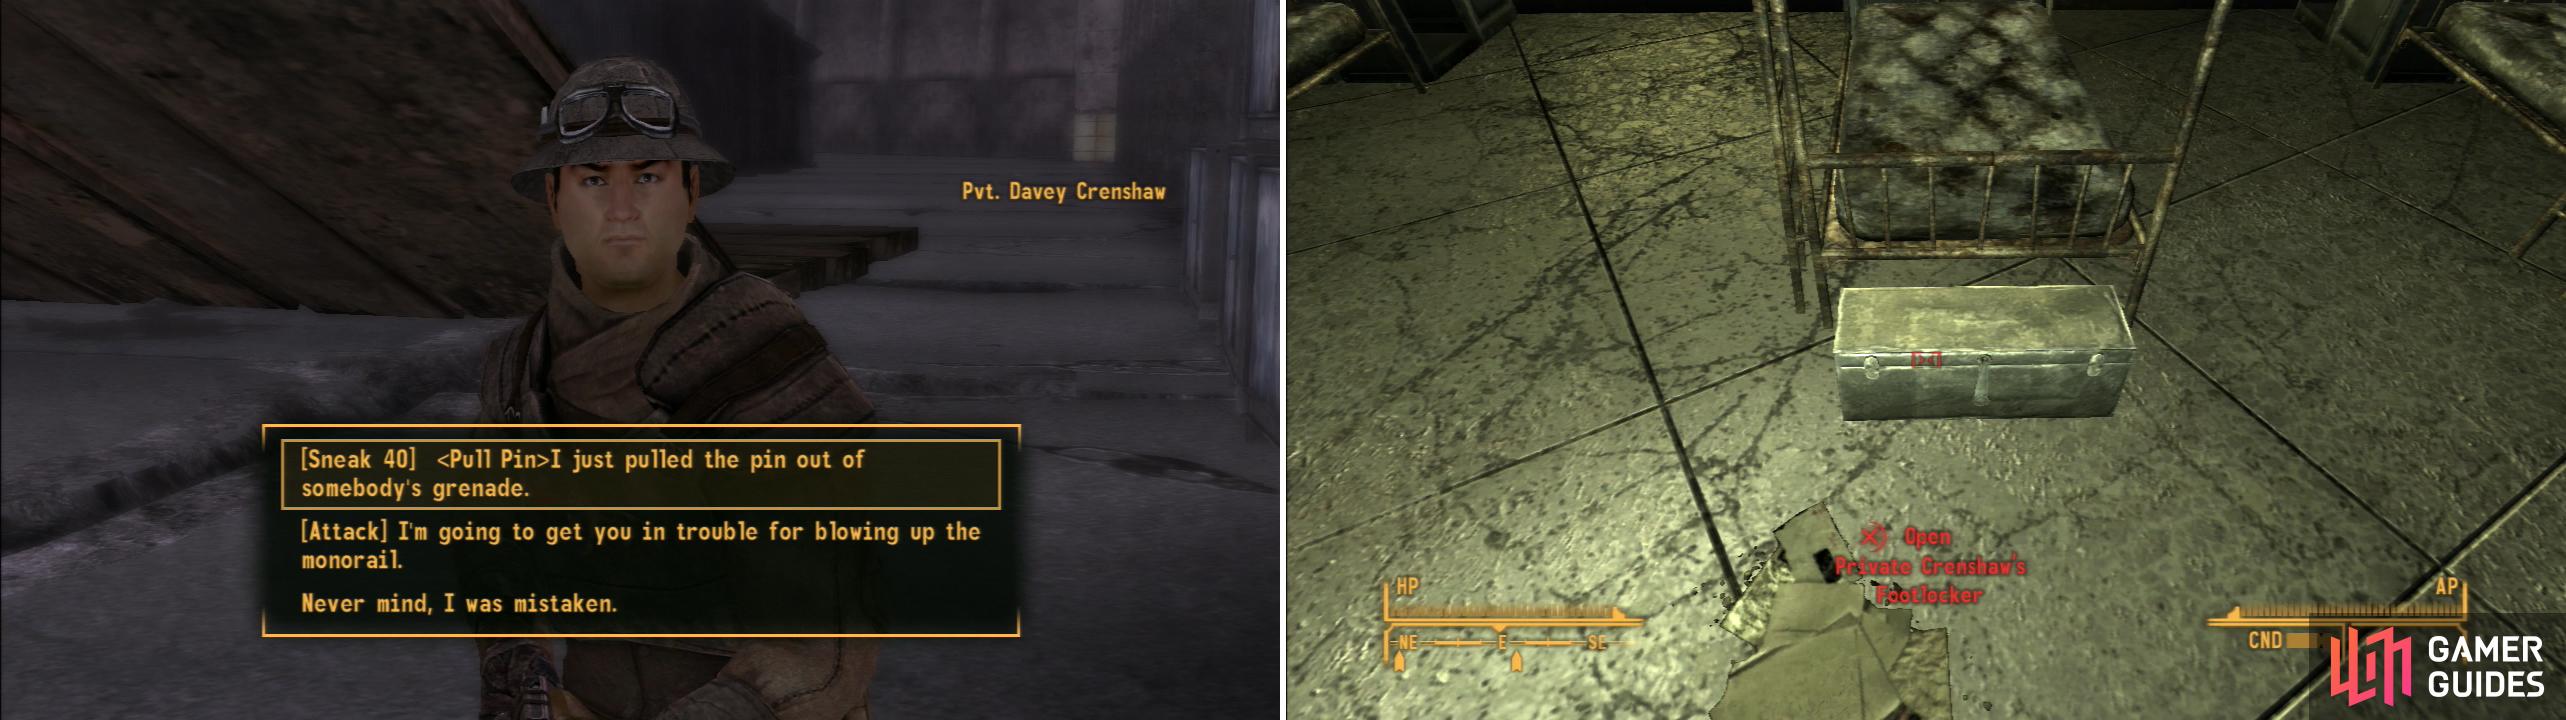 You can outright kill Private Crenshaw, if you’re quiet, but it’s more fun to play a little prank on him, instead (left). Once Private Crenshaw is out of the way, plant the evidence from the Garbage Can in his Footlocker to frame him (right).